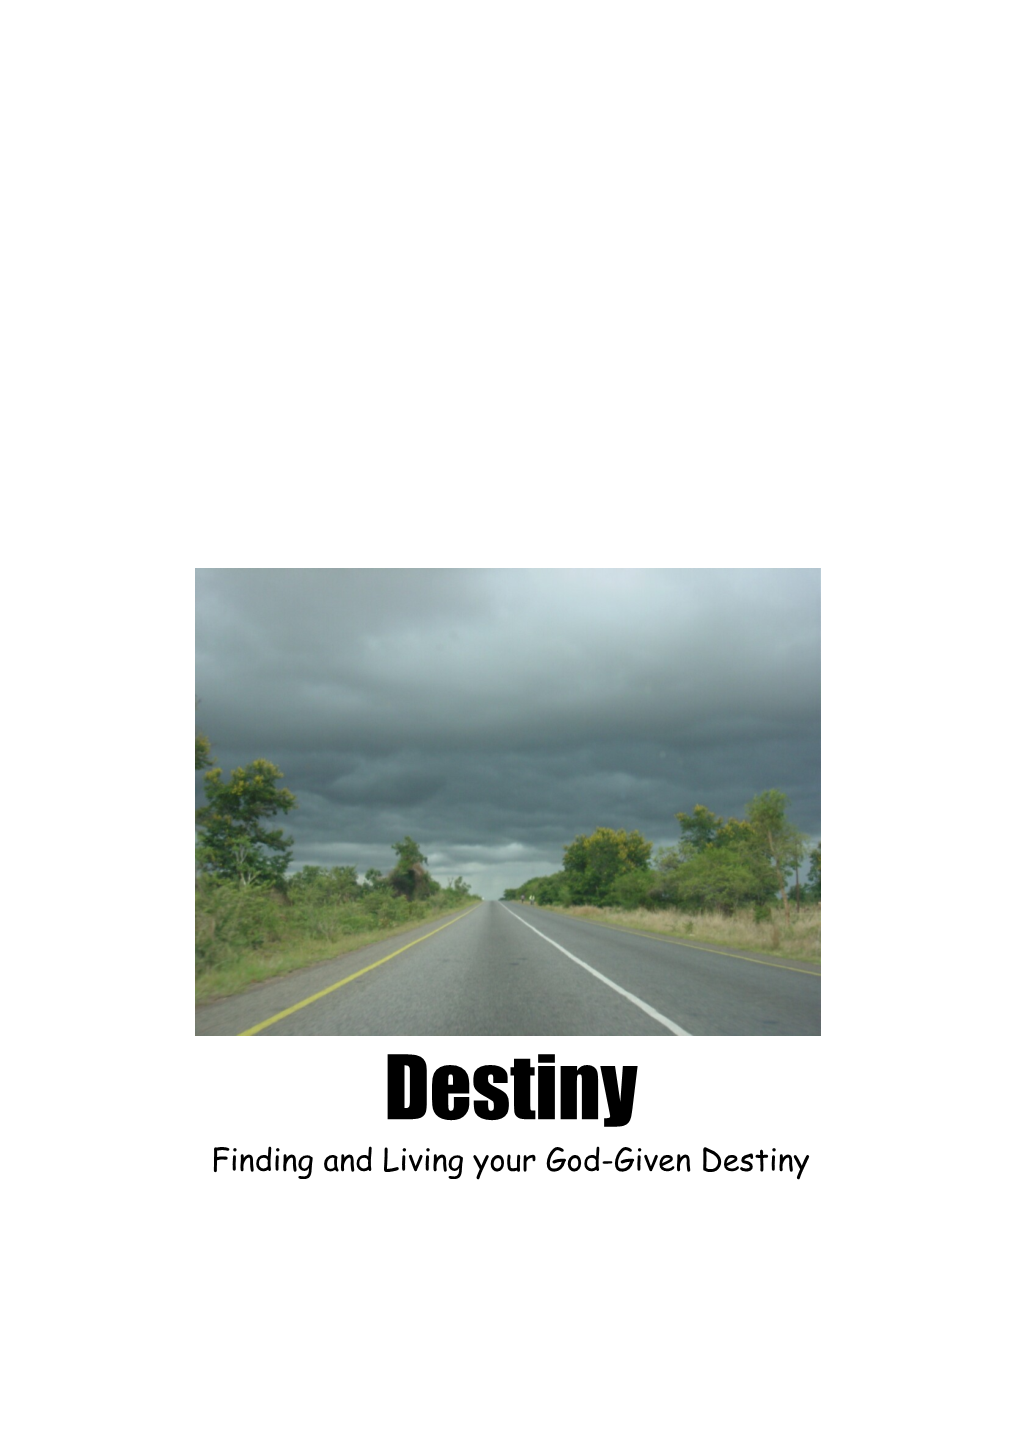 Finding and Living Your God-Given Destiny